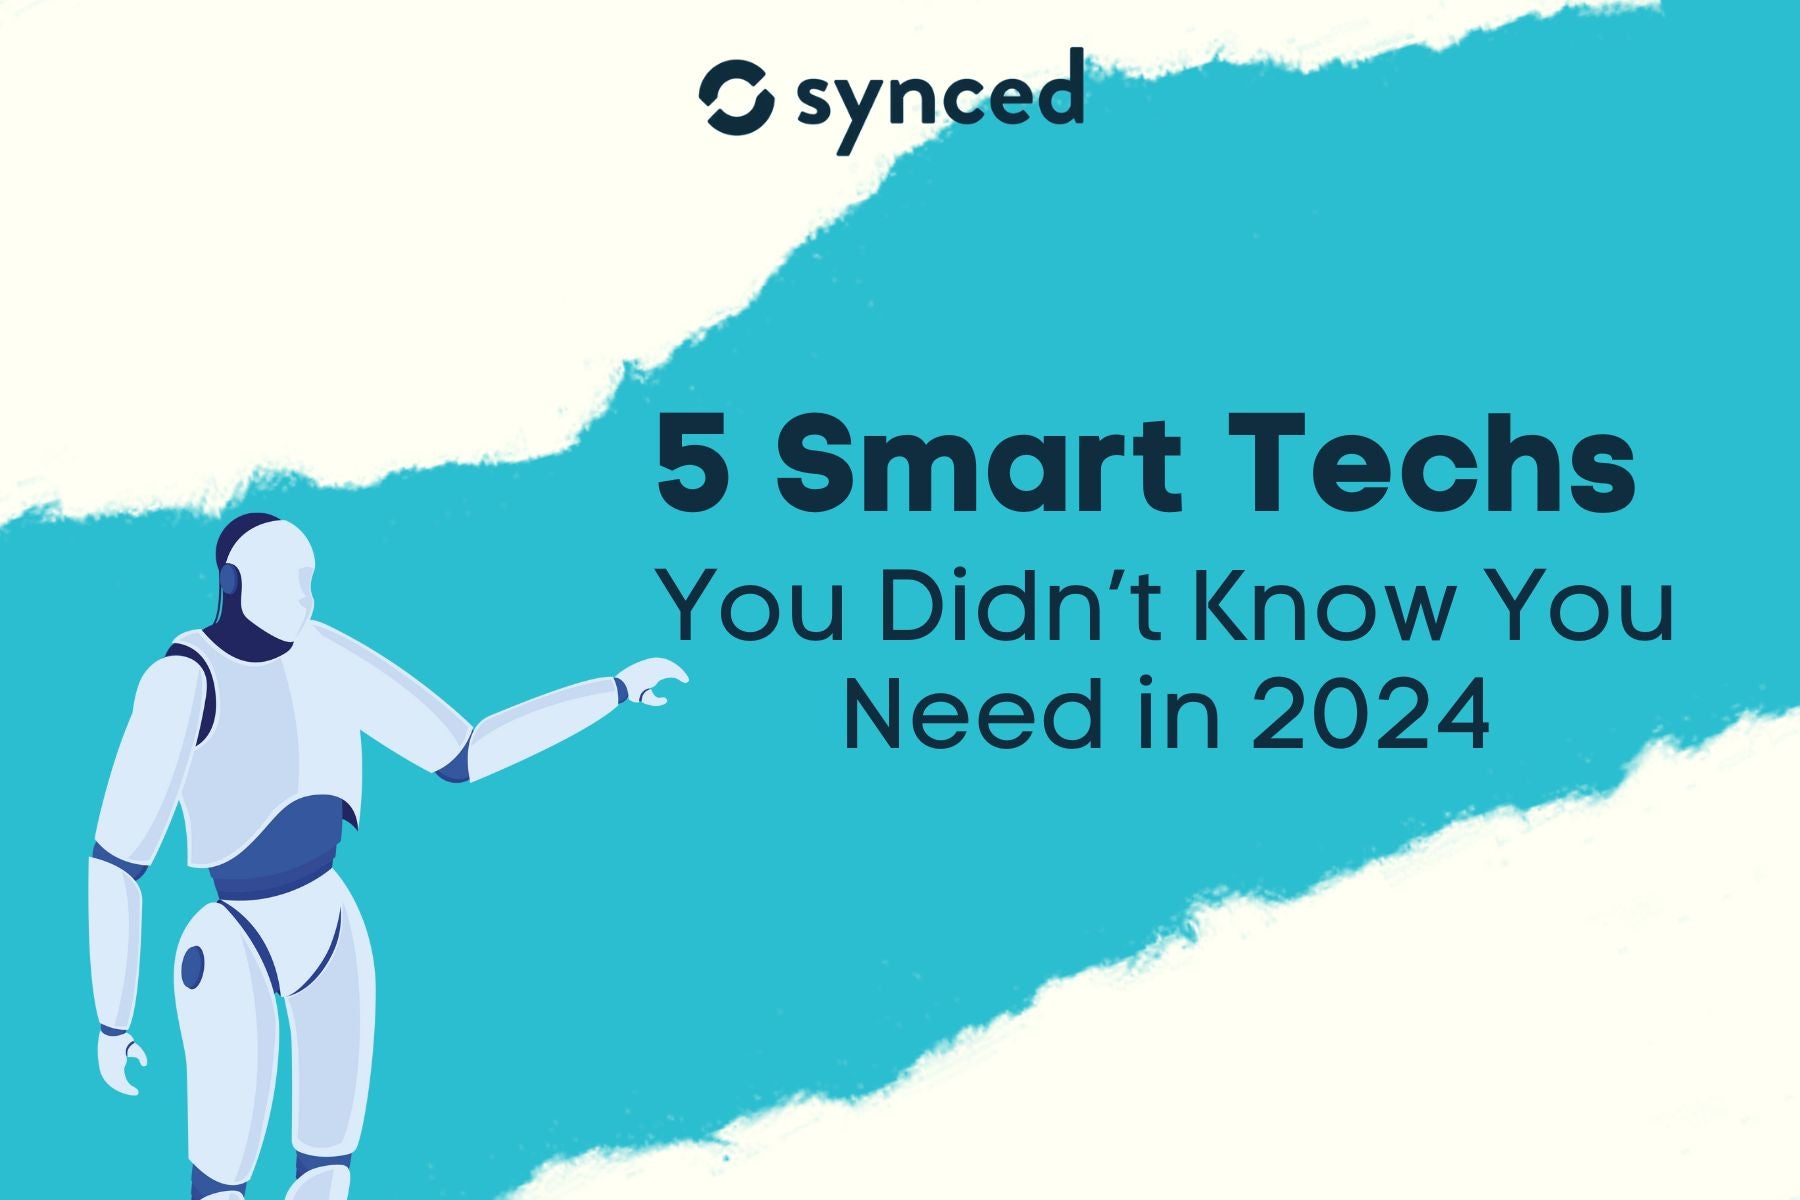 5 Smart Techs You Didn't Know You Need in 2024